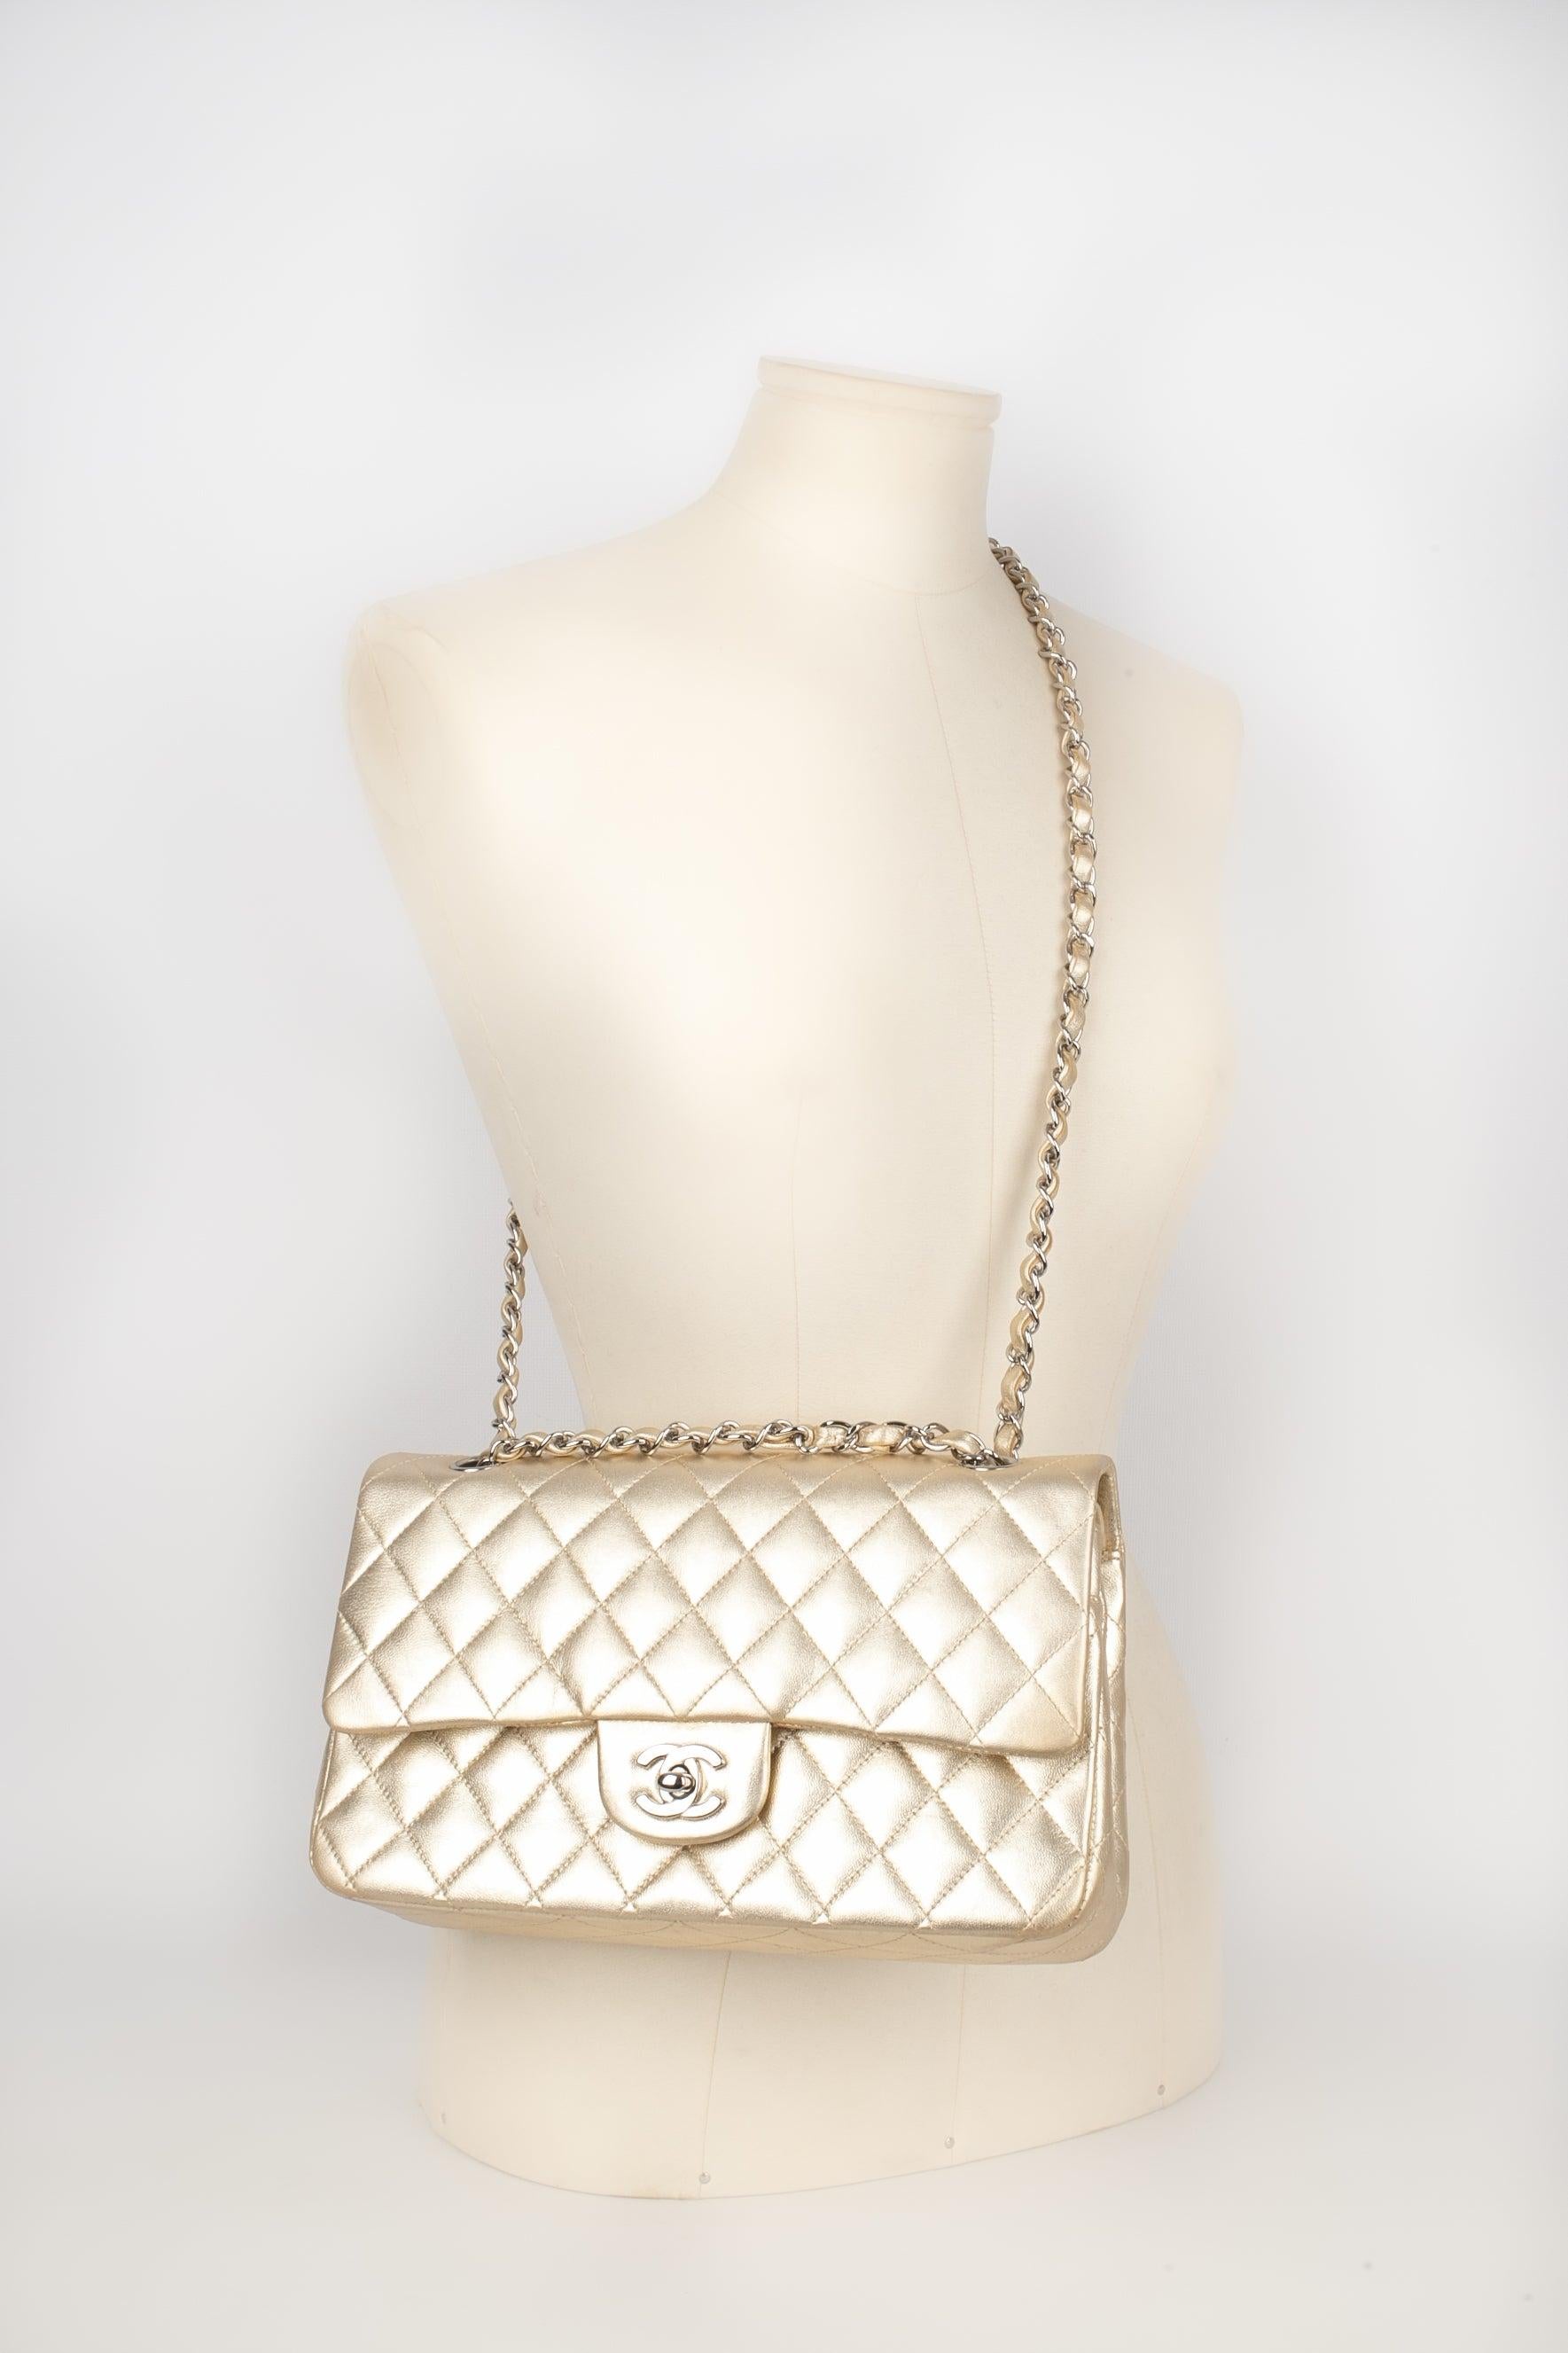 Chanel Timeless Pale-Golden Metallic Lamb Leather Classic Bag, 2006/2008 For Sale 9